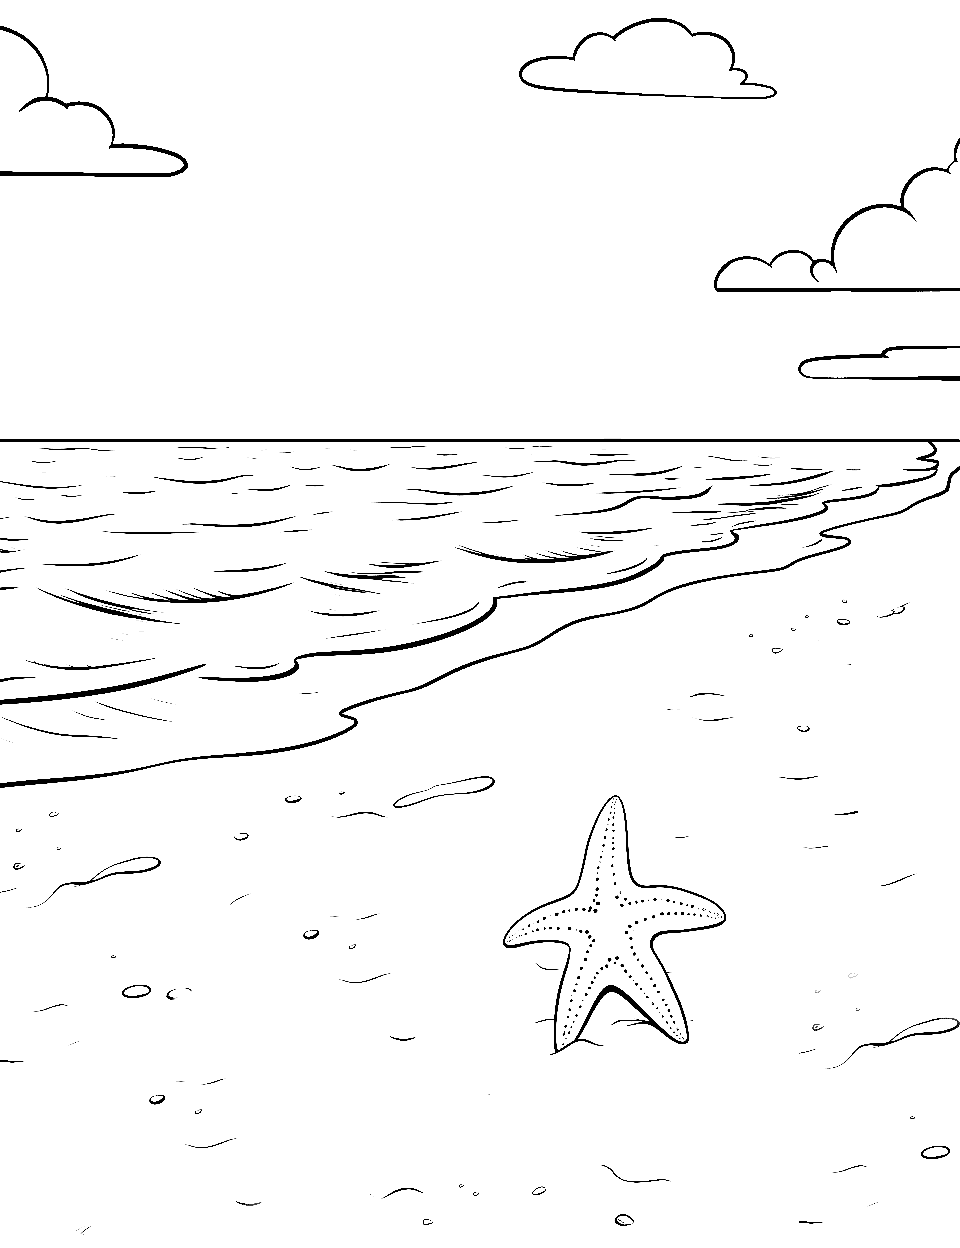 Seashore and Starfish Coloring Page - A single, bright starfish on the shore, with gentle waves coming in.